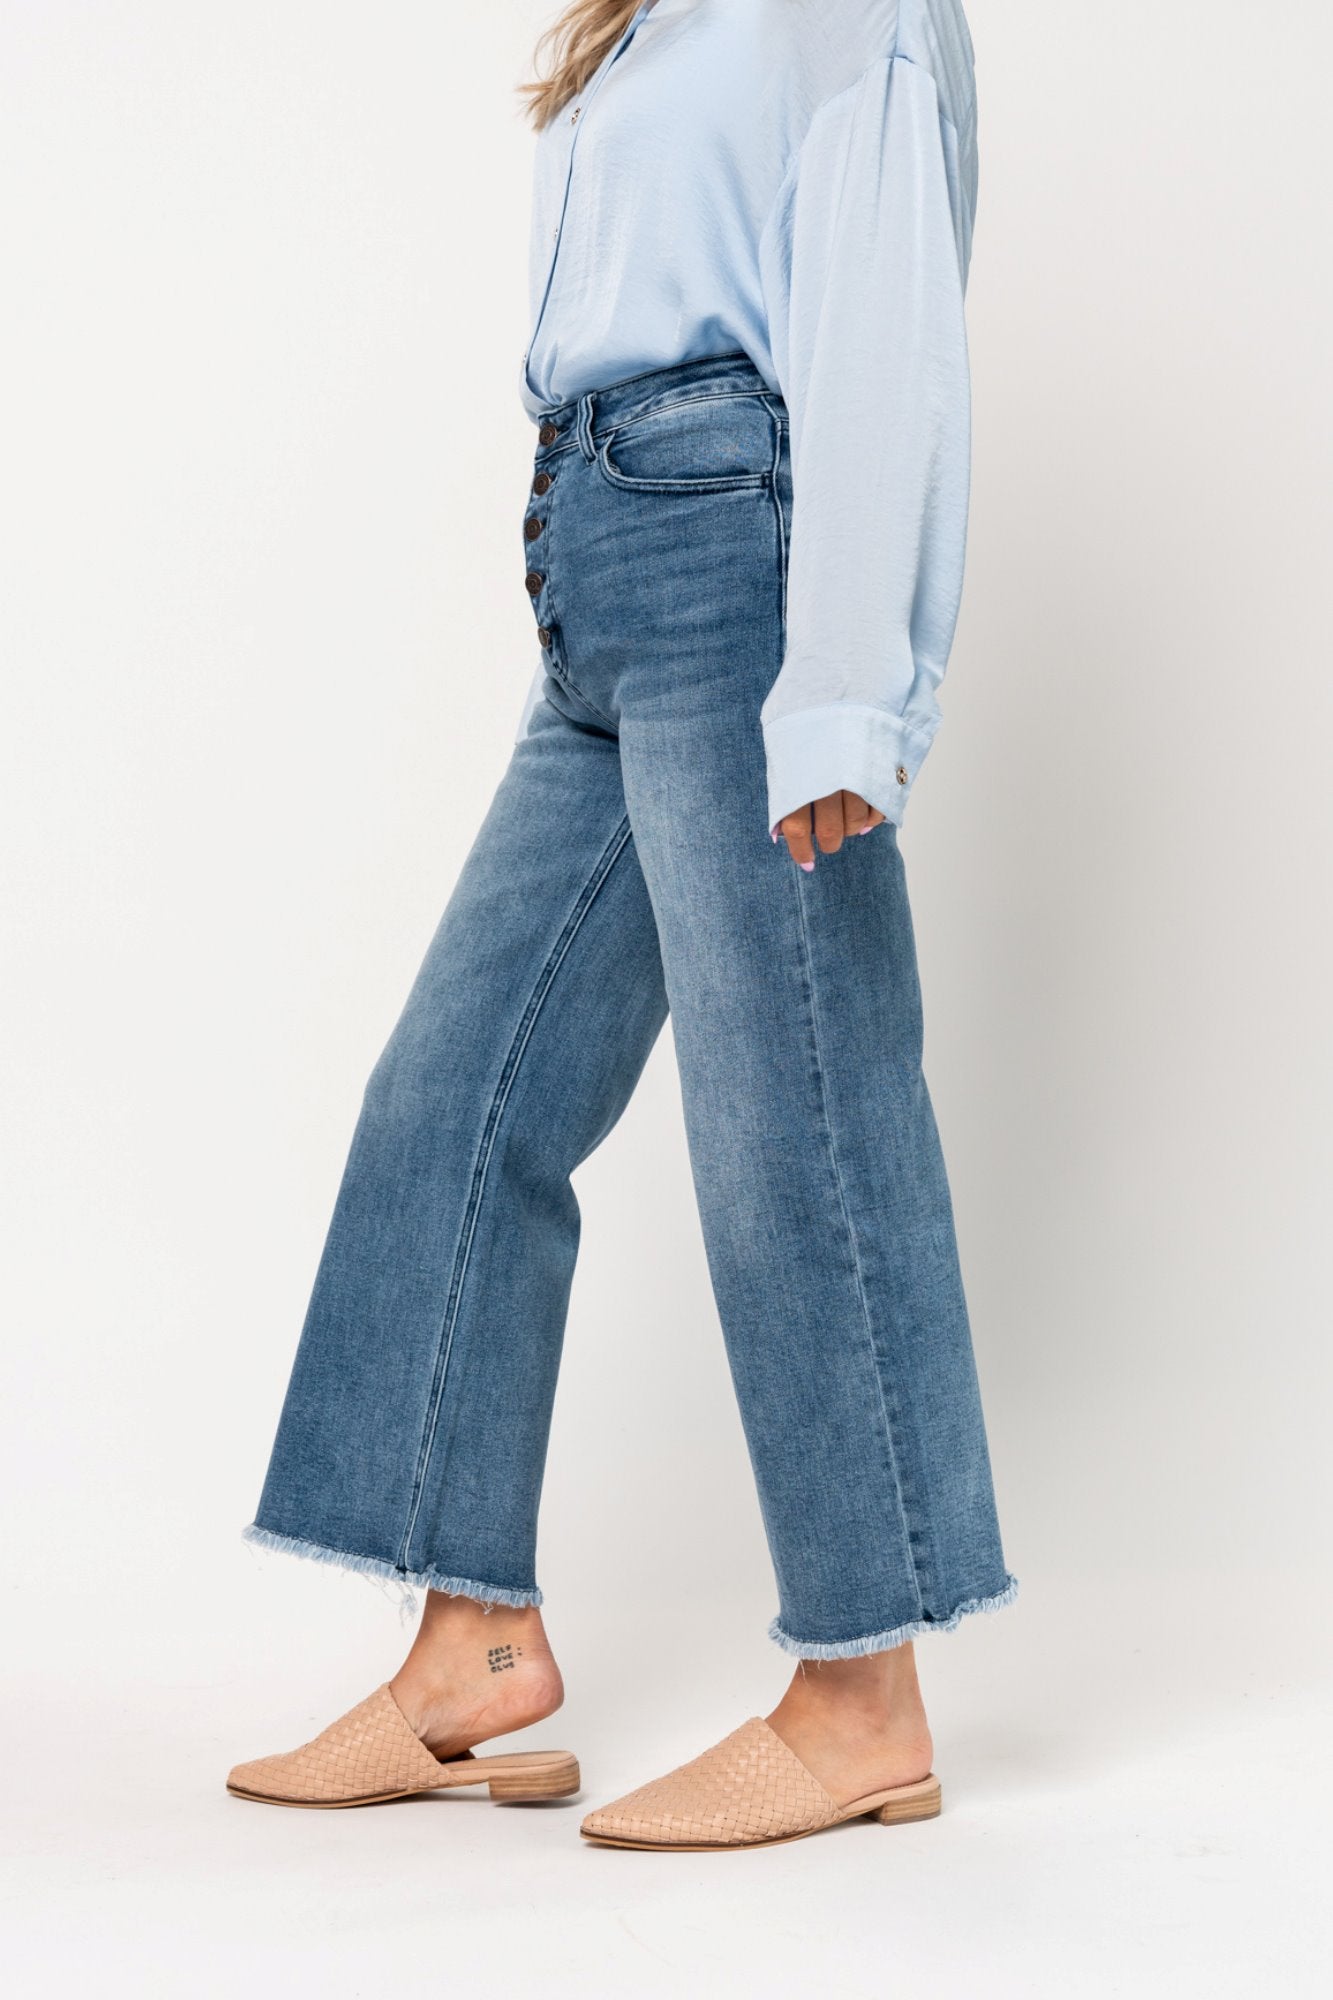 Harlow Jeans Holley Girl 